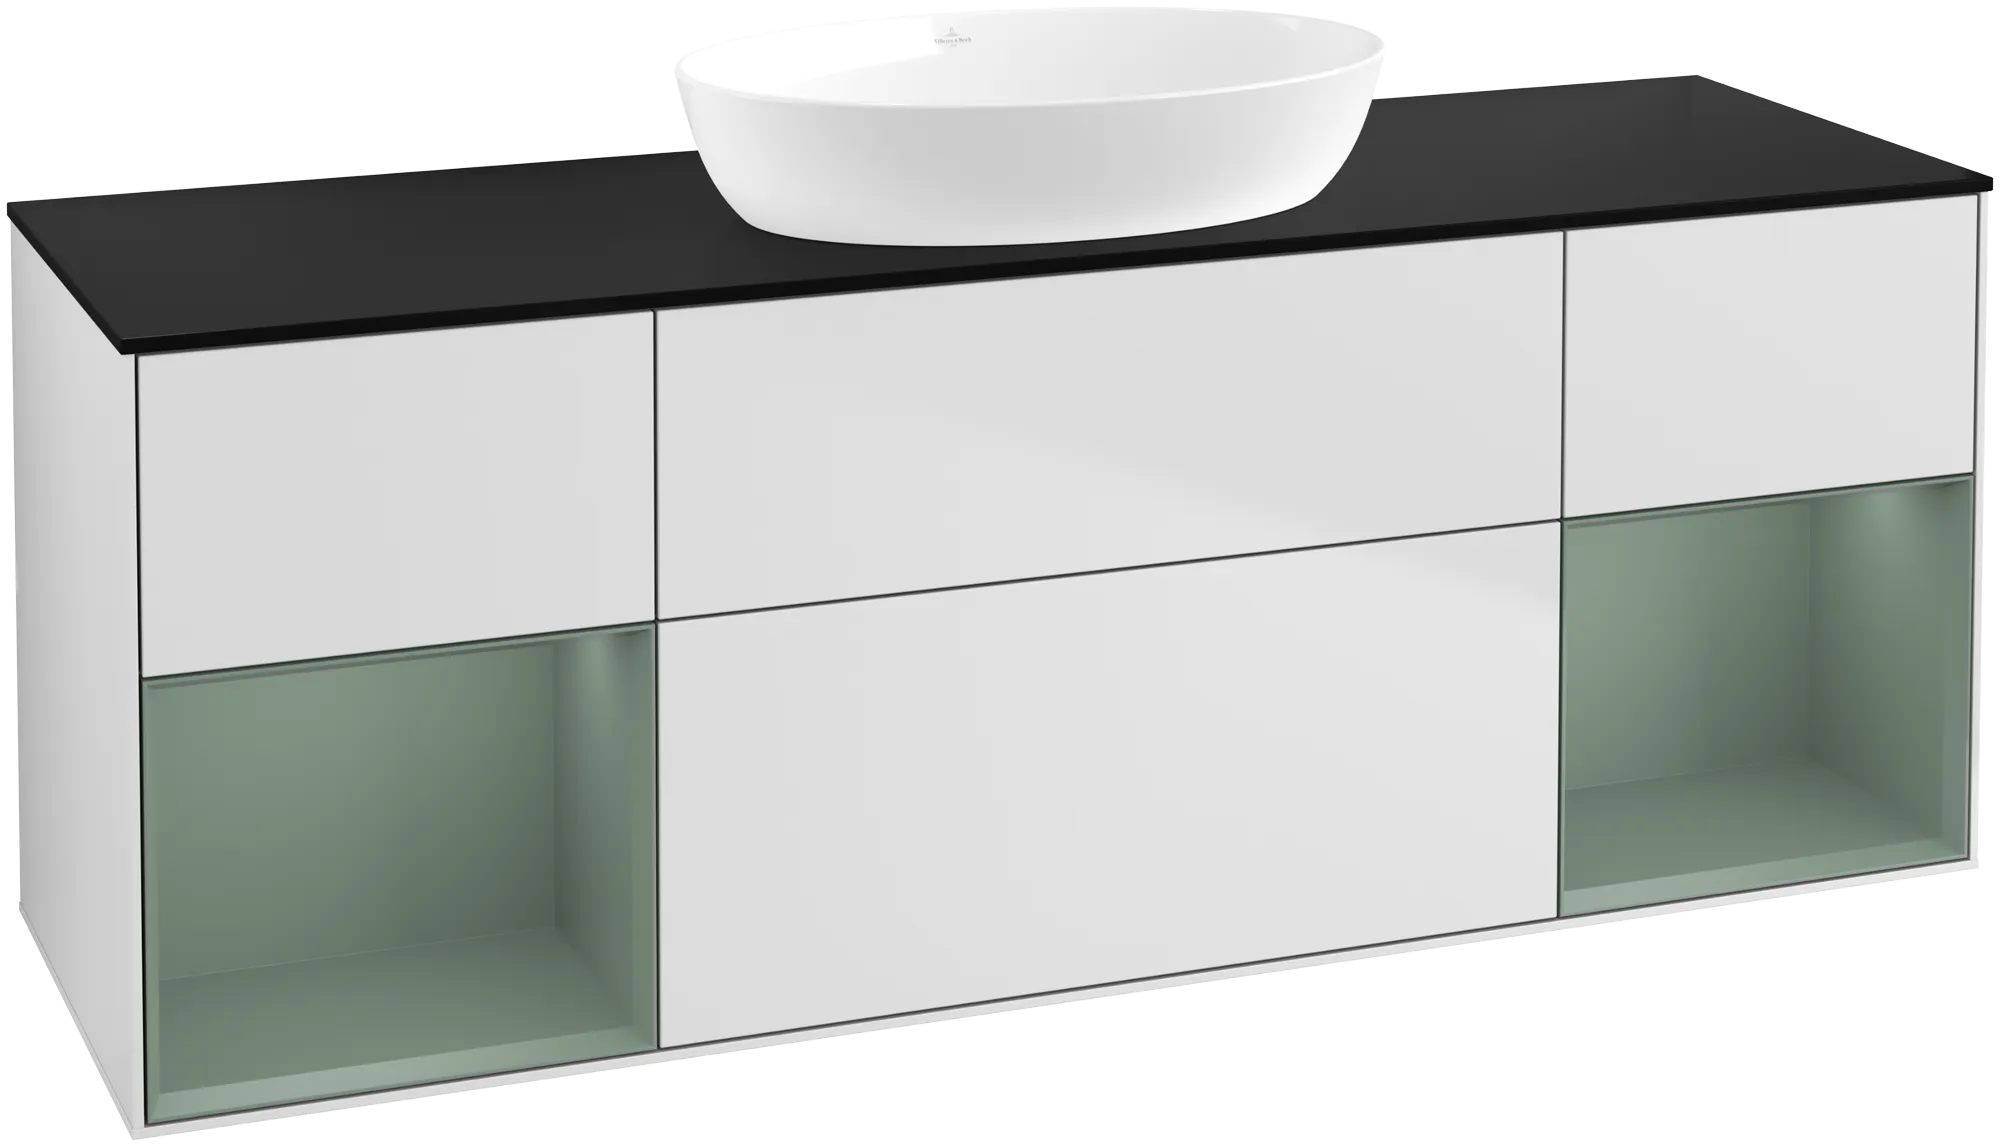 Picture of VILLEROY BOCH Finion Vanity unit, with lighting, 4 pull-out compartments, 1600 x 603 x 501 mm, White Matt Lacquer / Olive Matt Lacquer / Glass Black Matt #GD02GMMT